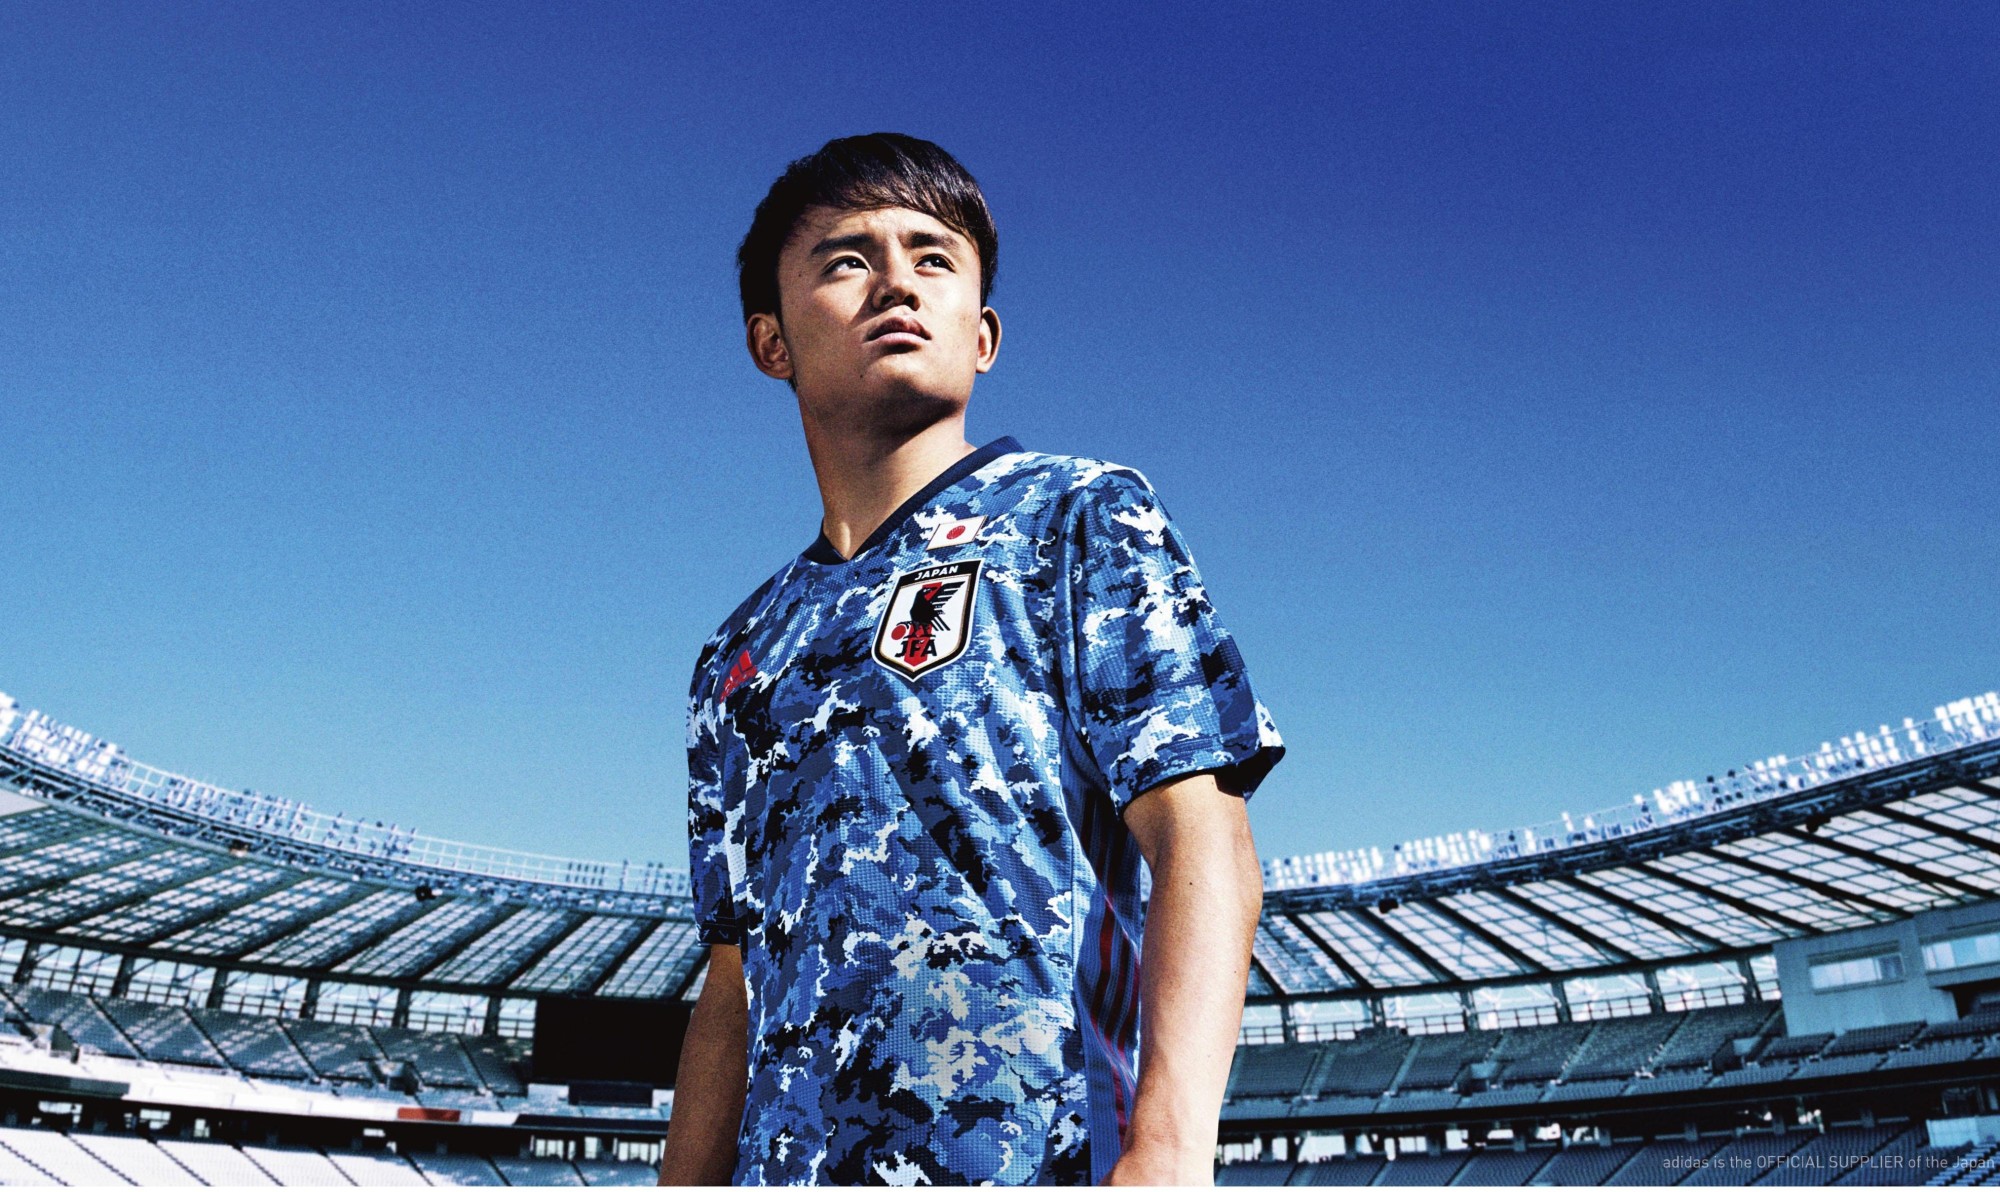 ADIDAS JAPAN CAPTAIN TSUBASA 2018 WORLD CUP SPECIAL EDITION JERSEY |  Request Details